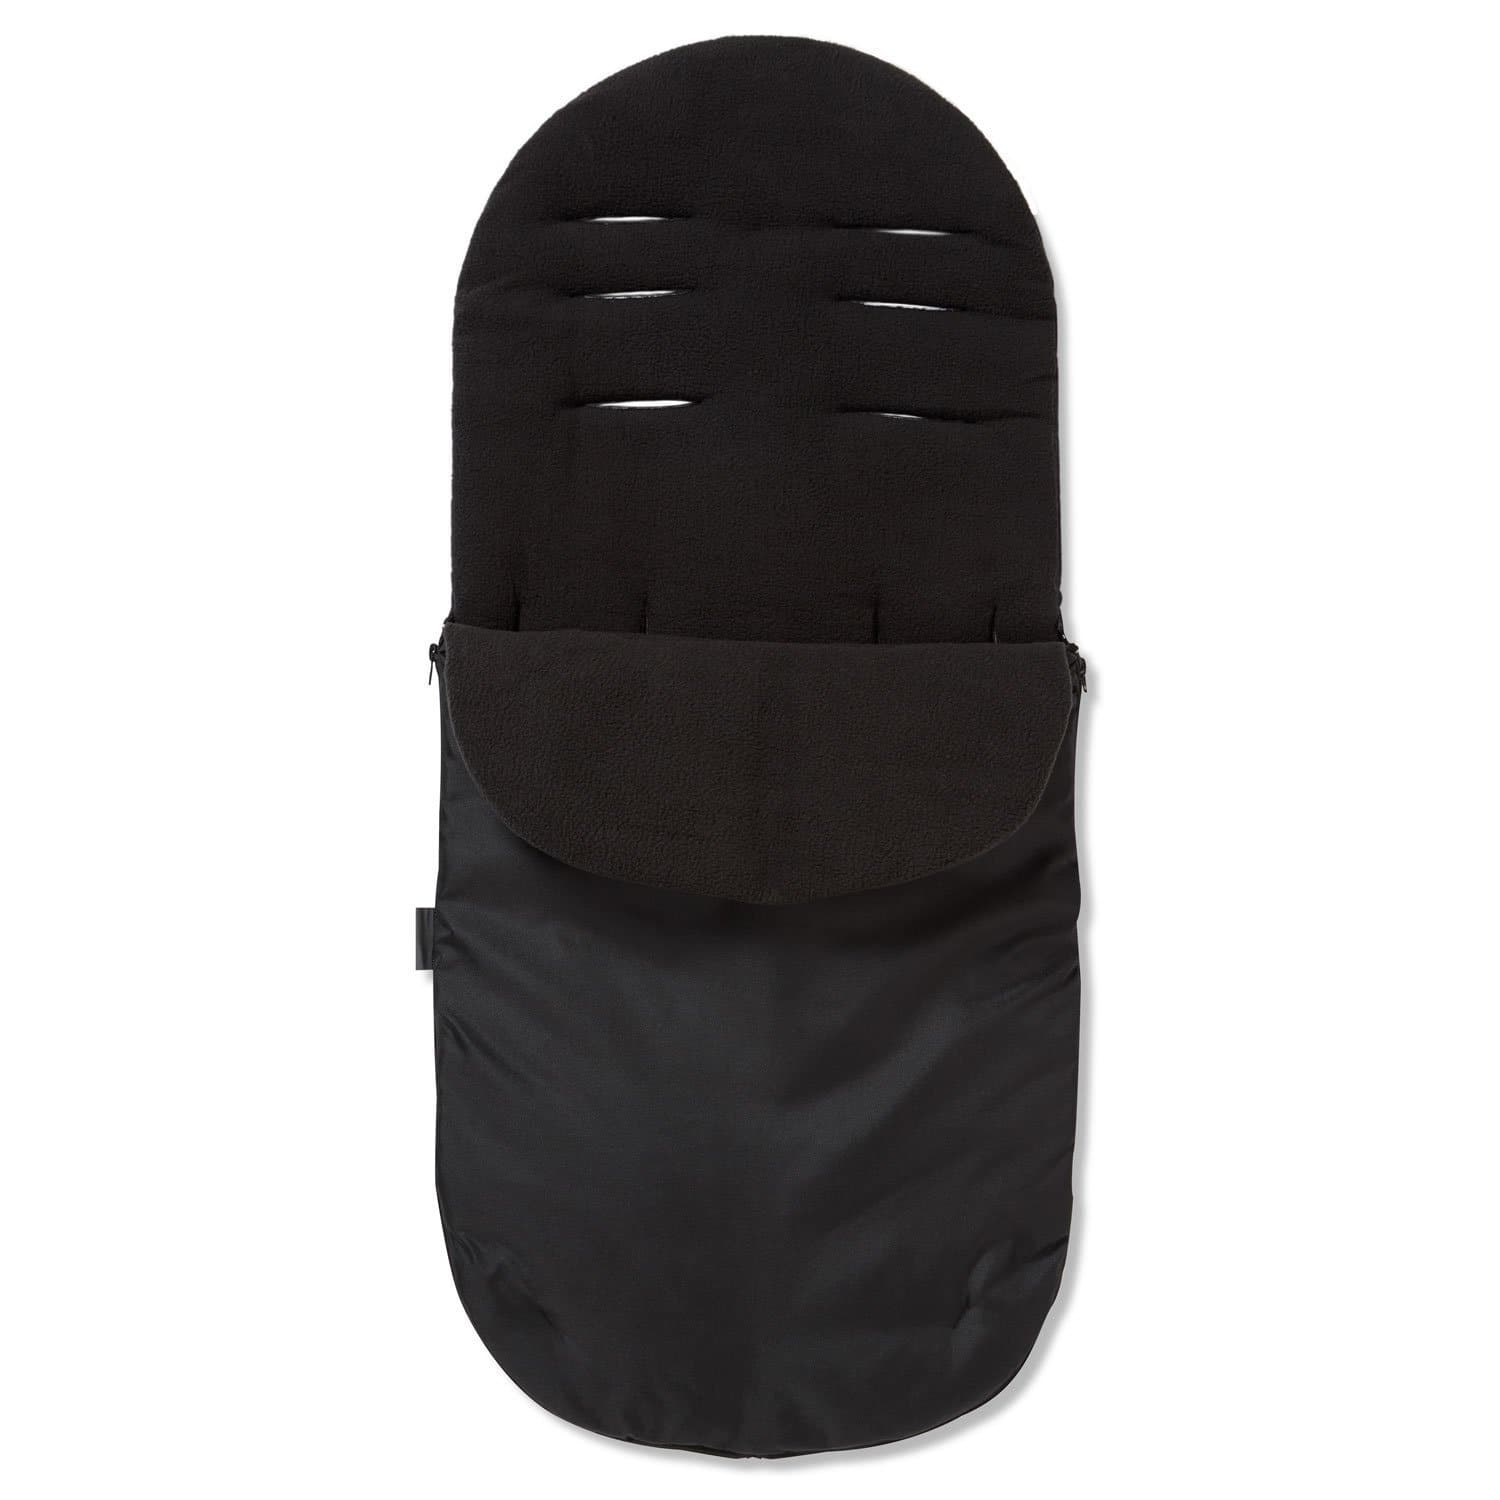 Footmuff / Cosy Toes Compatible with Infababy - Black / Fits All Models | For Your Little One